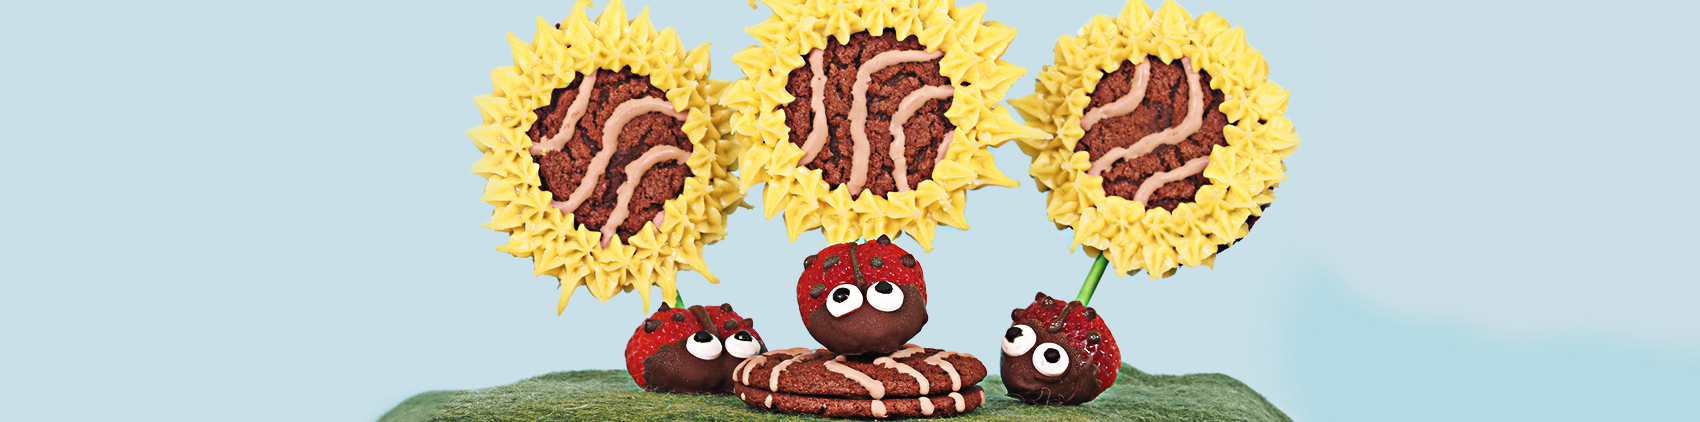 Springtime snacking just got a whole lot sweeter! Fieldstone Bakery Fudge Rounds combine with icing to create the sweetest of sunflowers, while strawberries dipped in chocolate make fun little ladybugs.